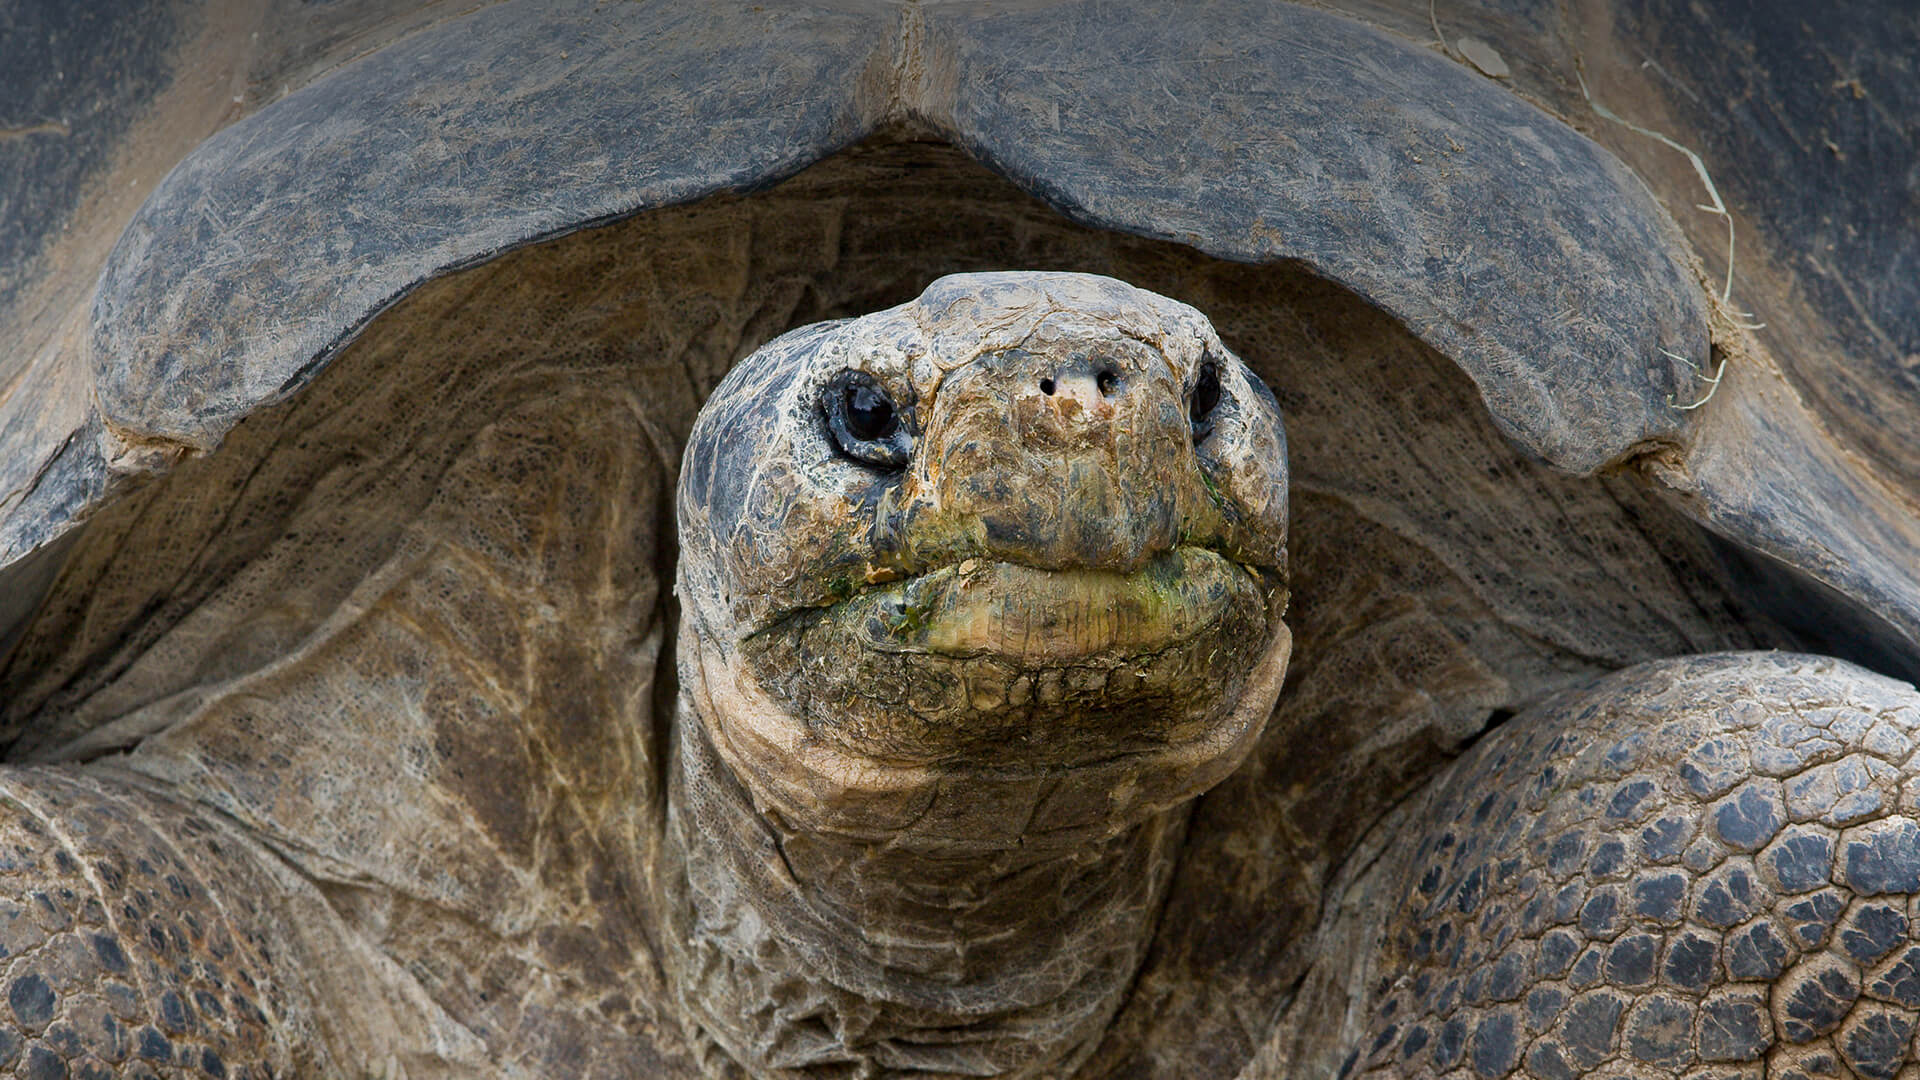 Galapagos tortoise with mouth stained by green vegetation meal